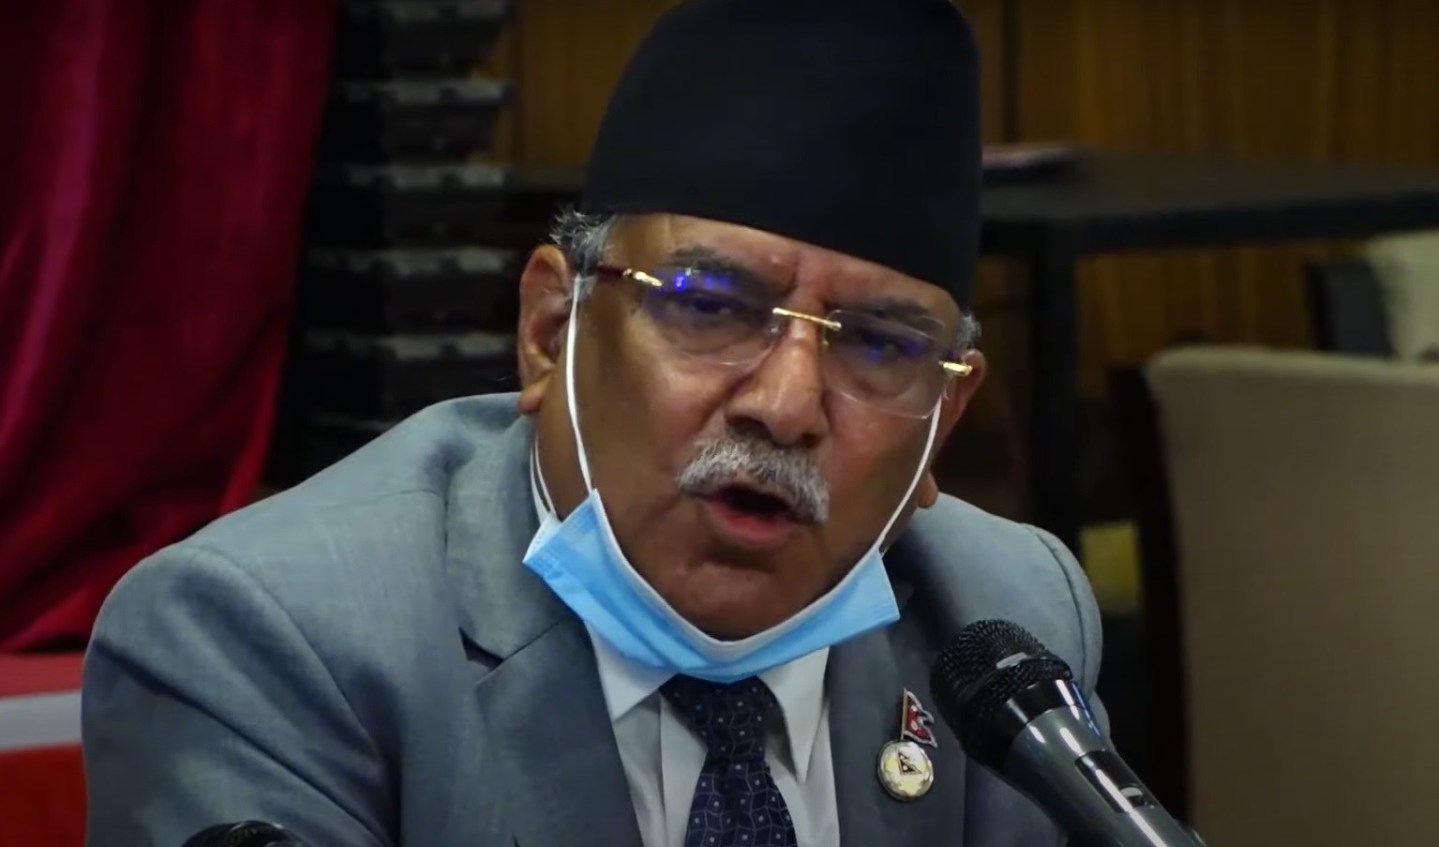 Dahal rules out ‘clandestine deal’ with PM Oli